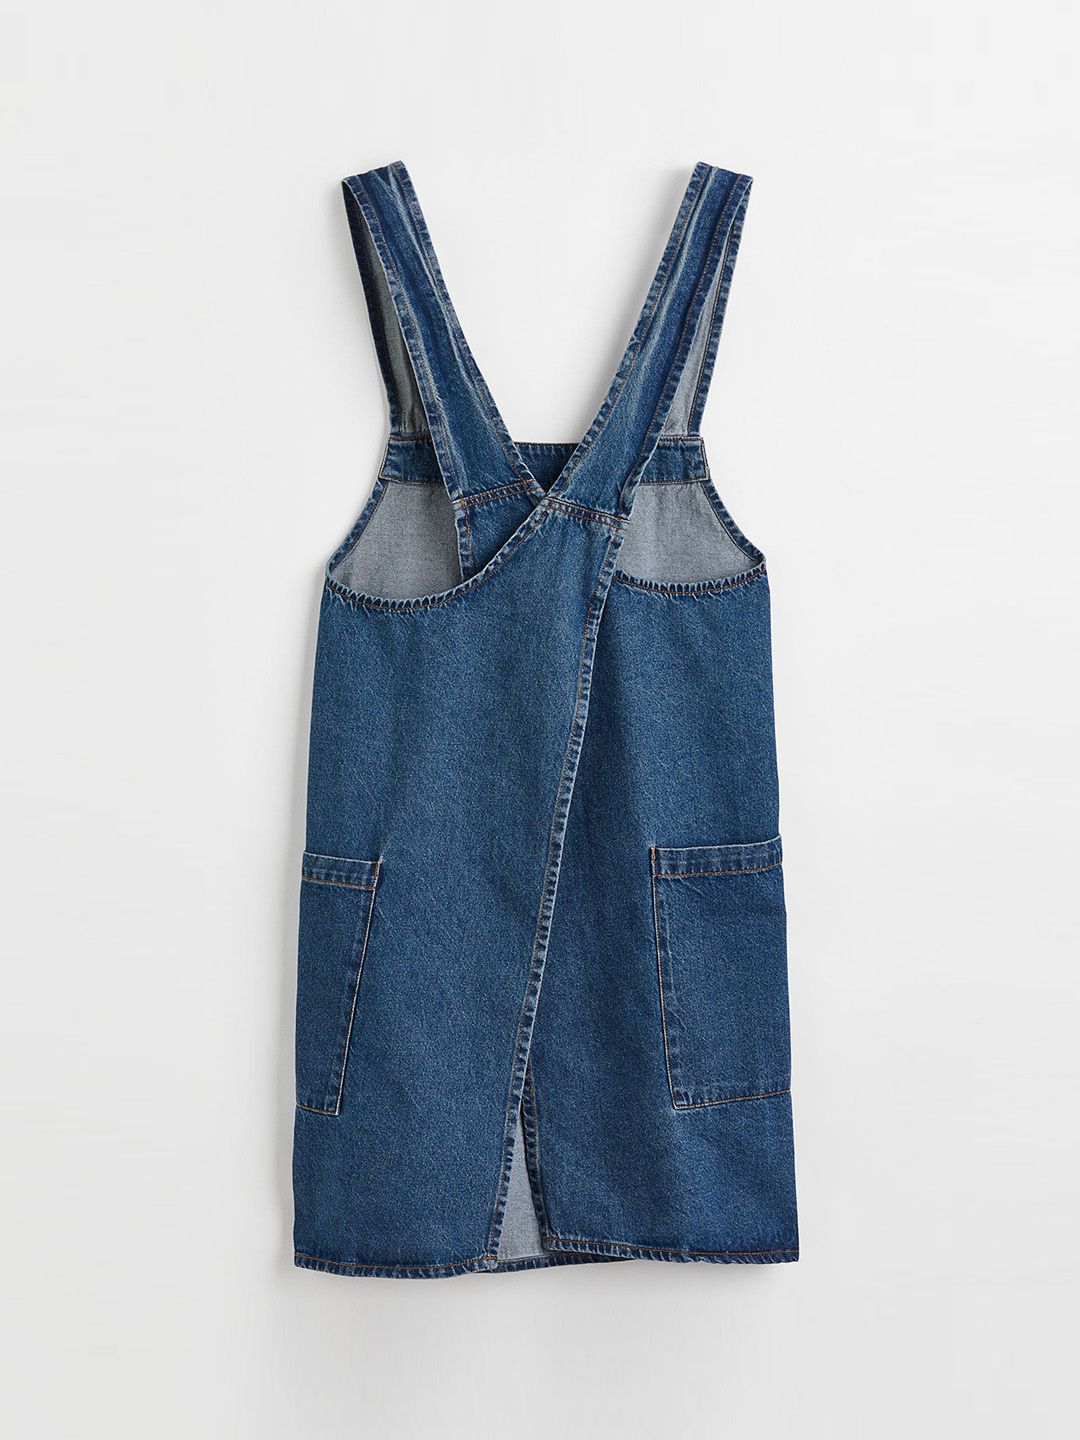 H&M Navy Blue Solid Pure Cotton Denim Apron Price in India